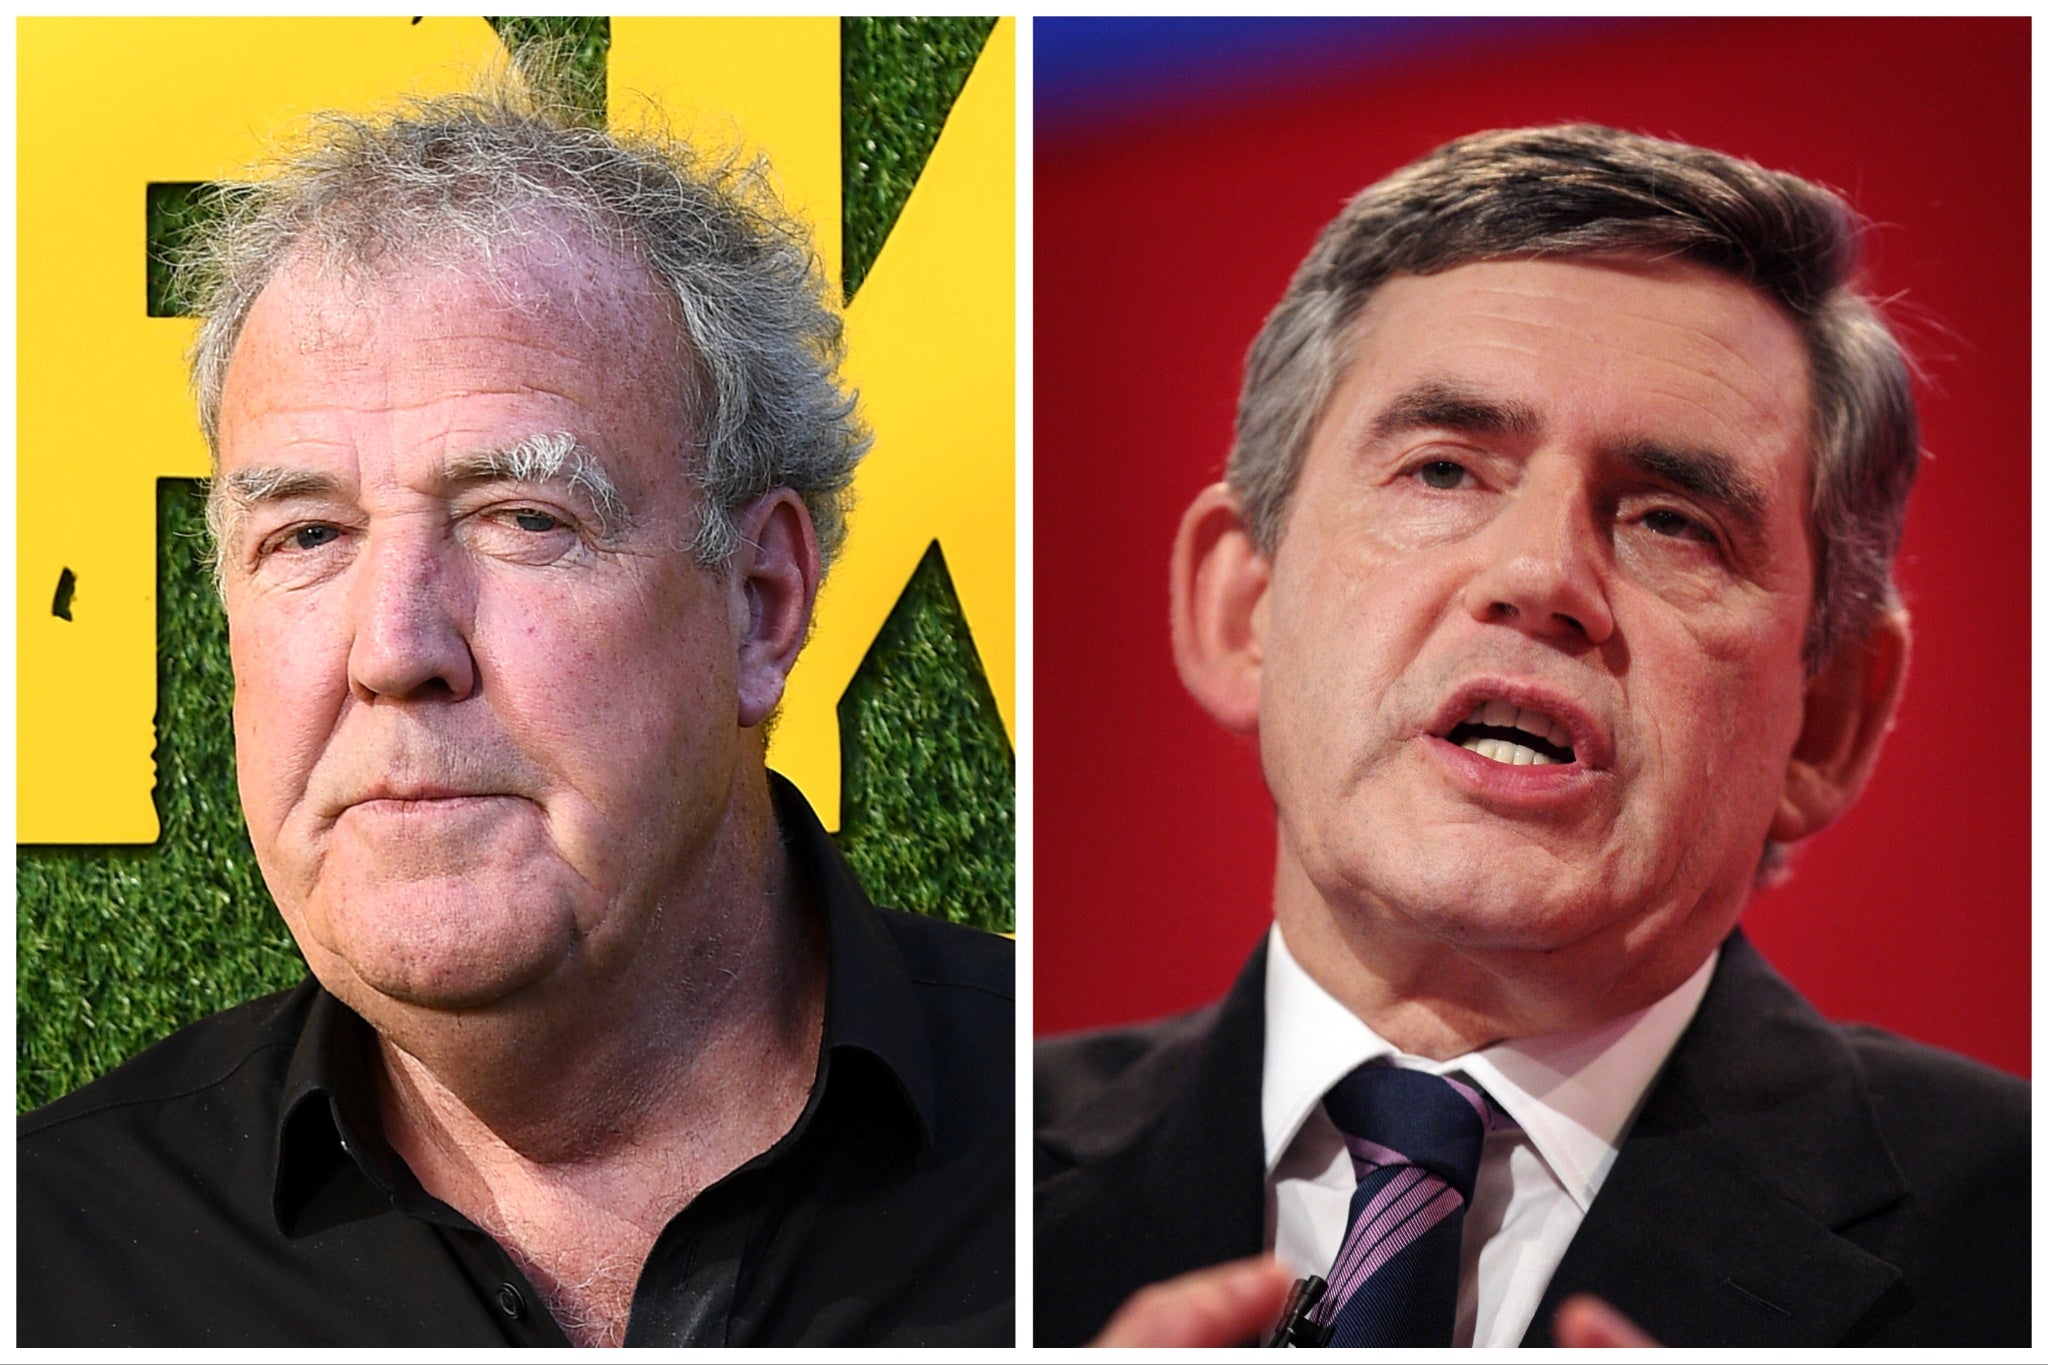 Jeremy Clarkson (left) and Gordon Brown